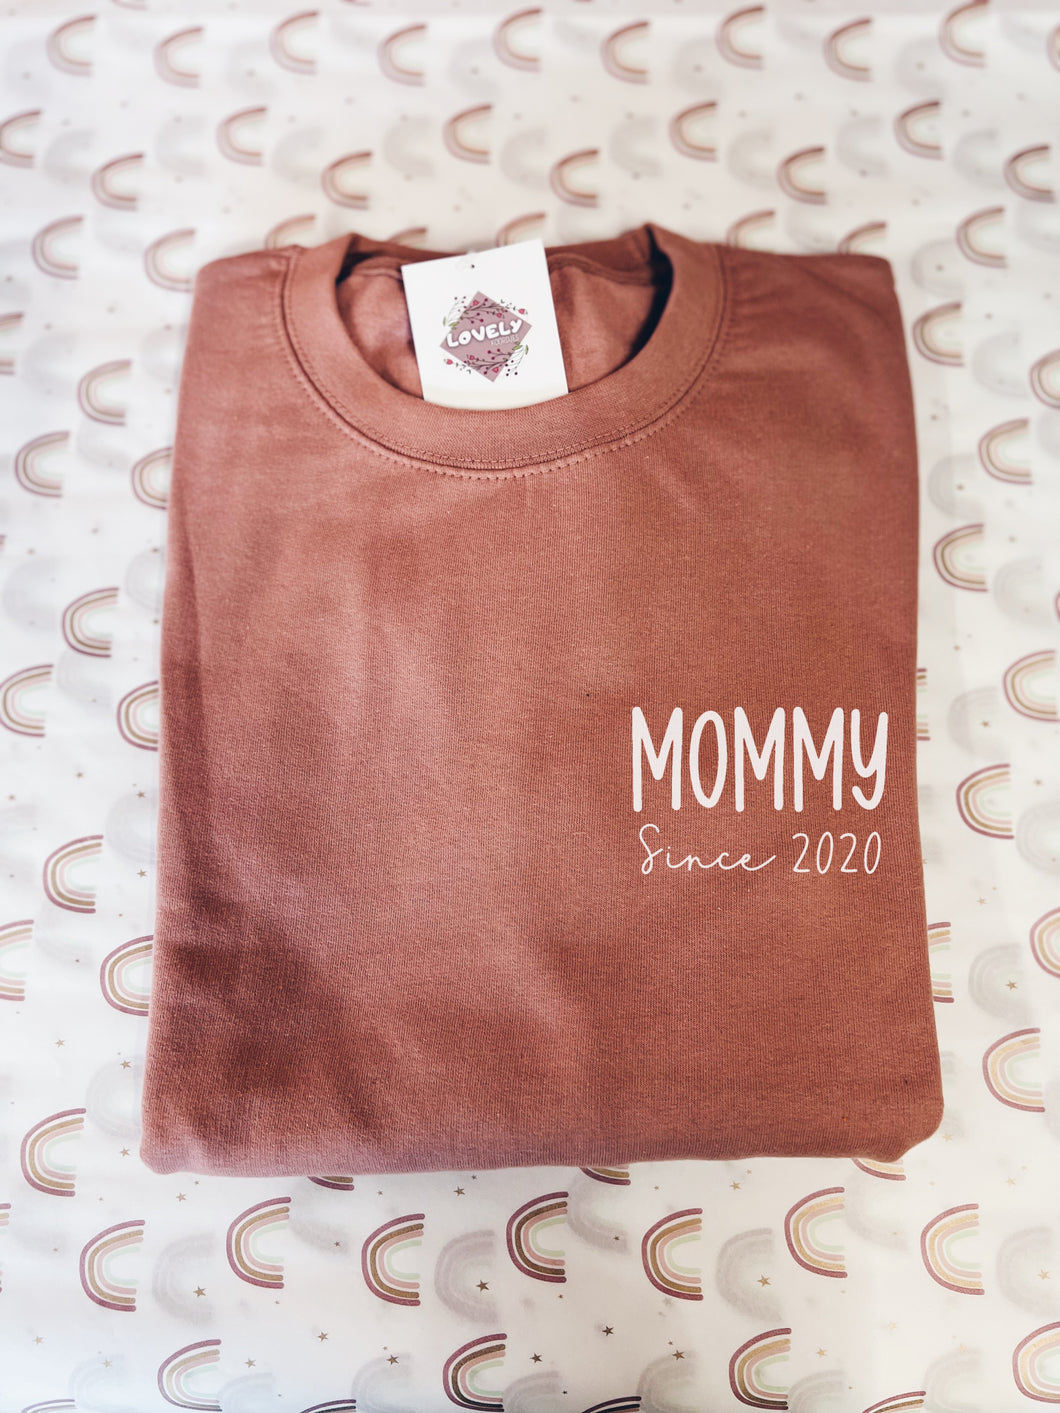 Mommy - Sweater